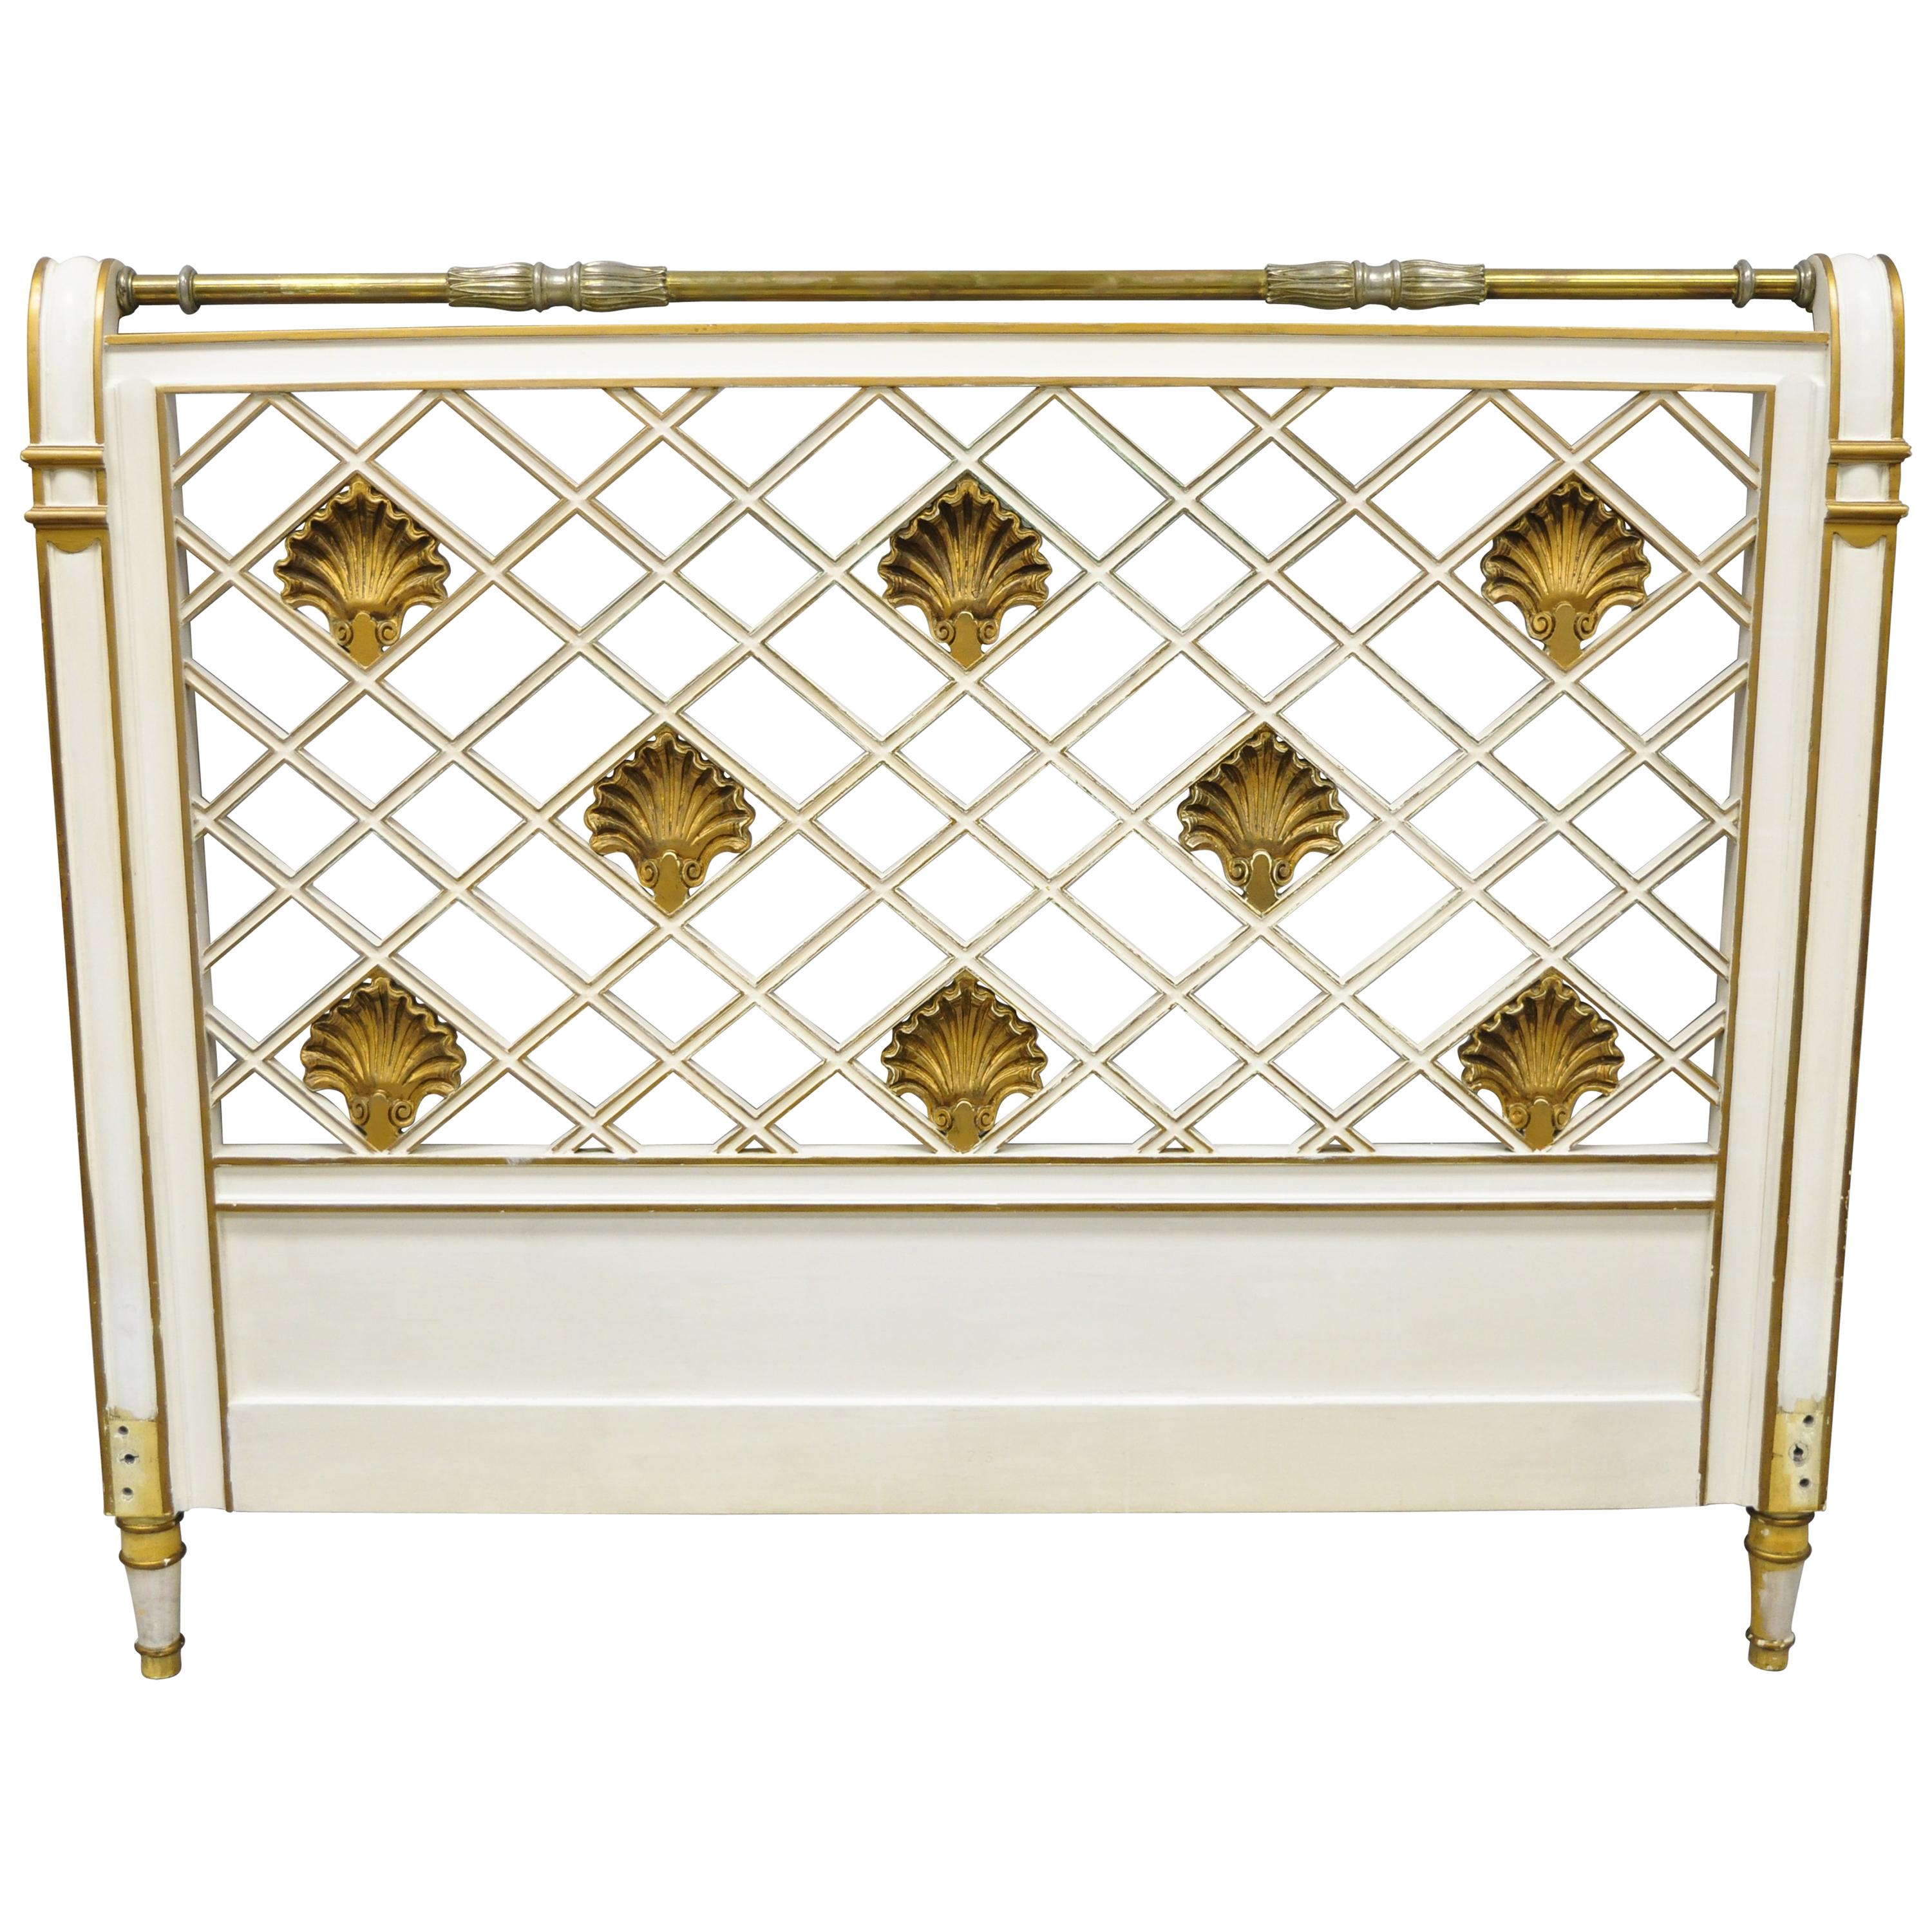 French Neoclassical Style Italian Shell Carve Lattice Queen Size Bed Headboard